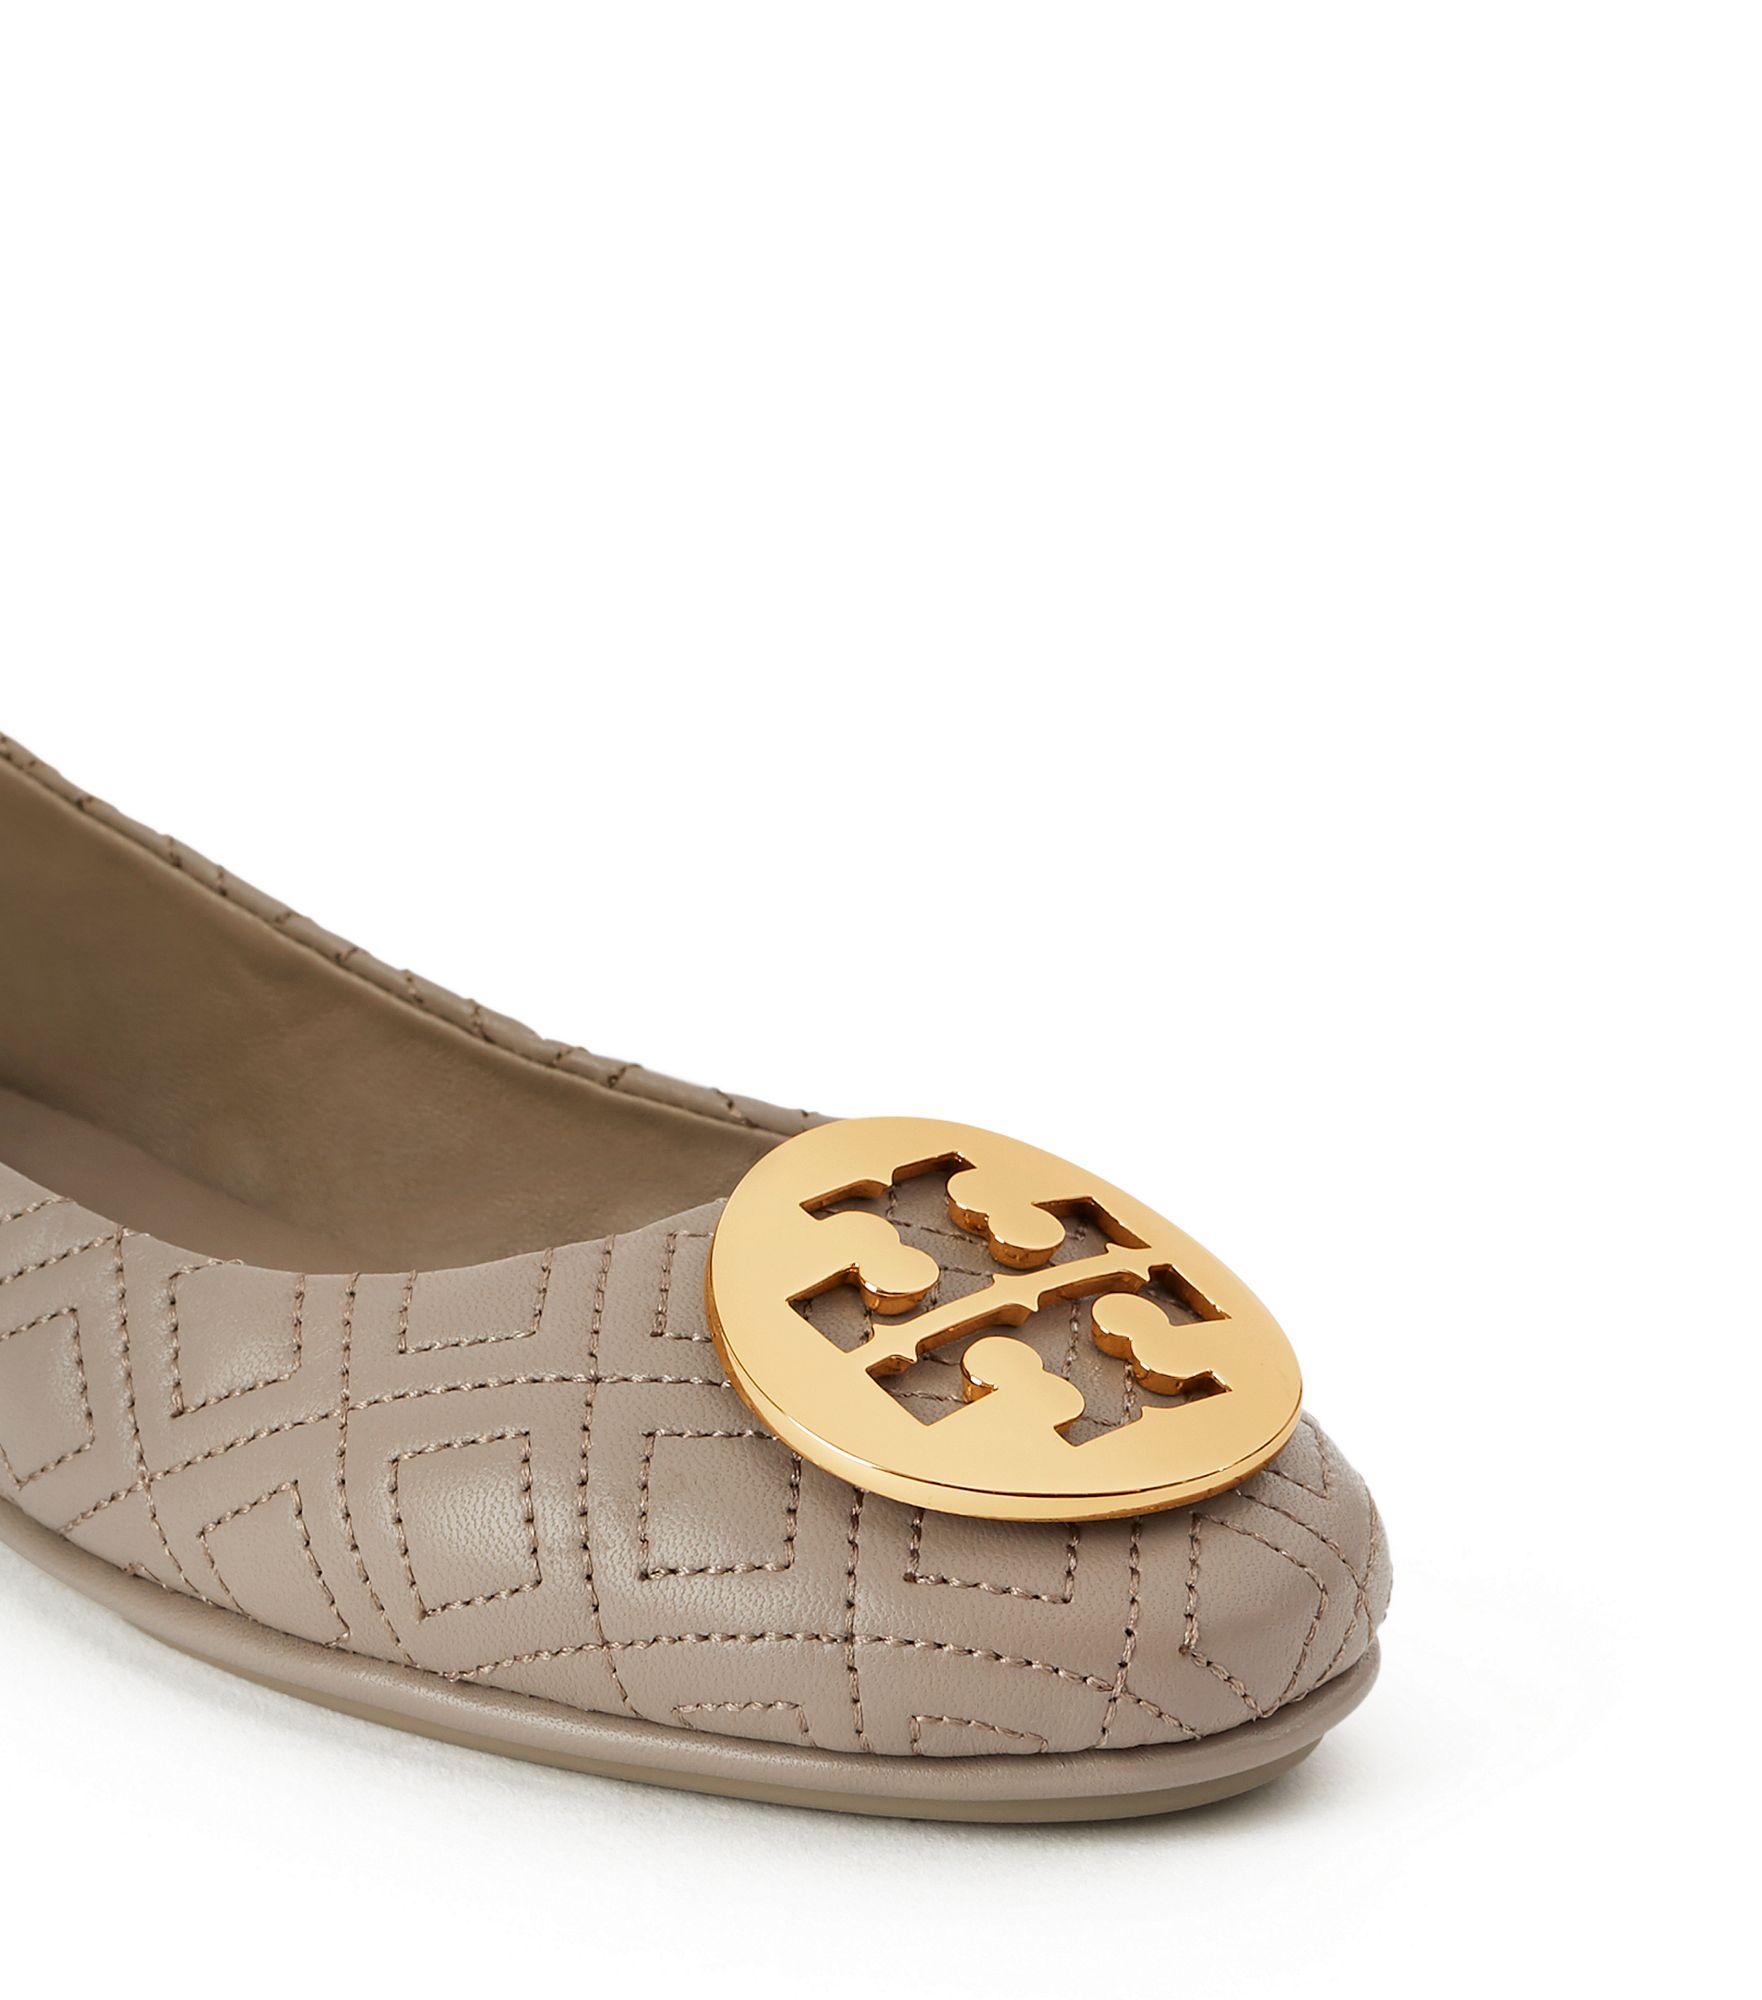 Tory Burch Minnie Travel Ballet Flats, Quilted Leather in Metallic - Lyst